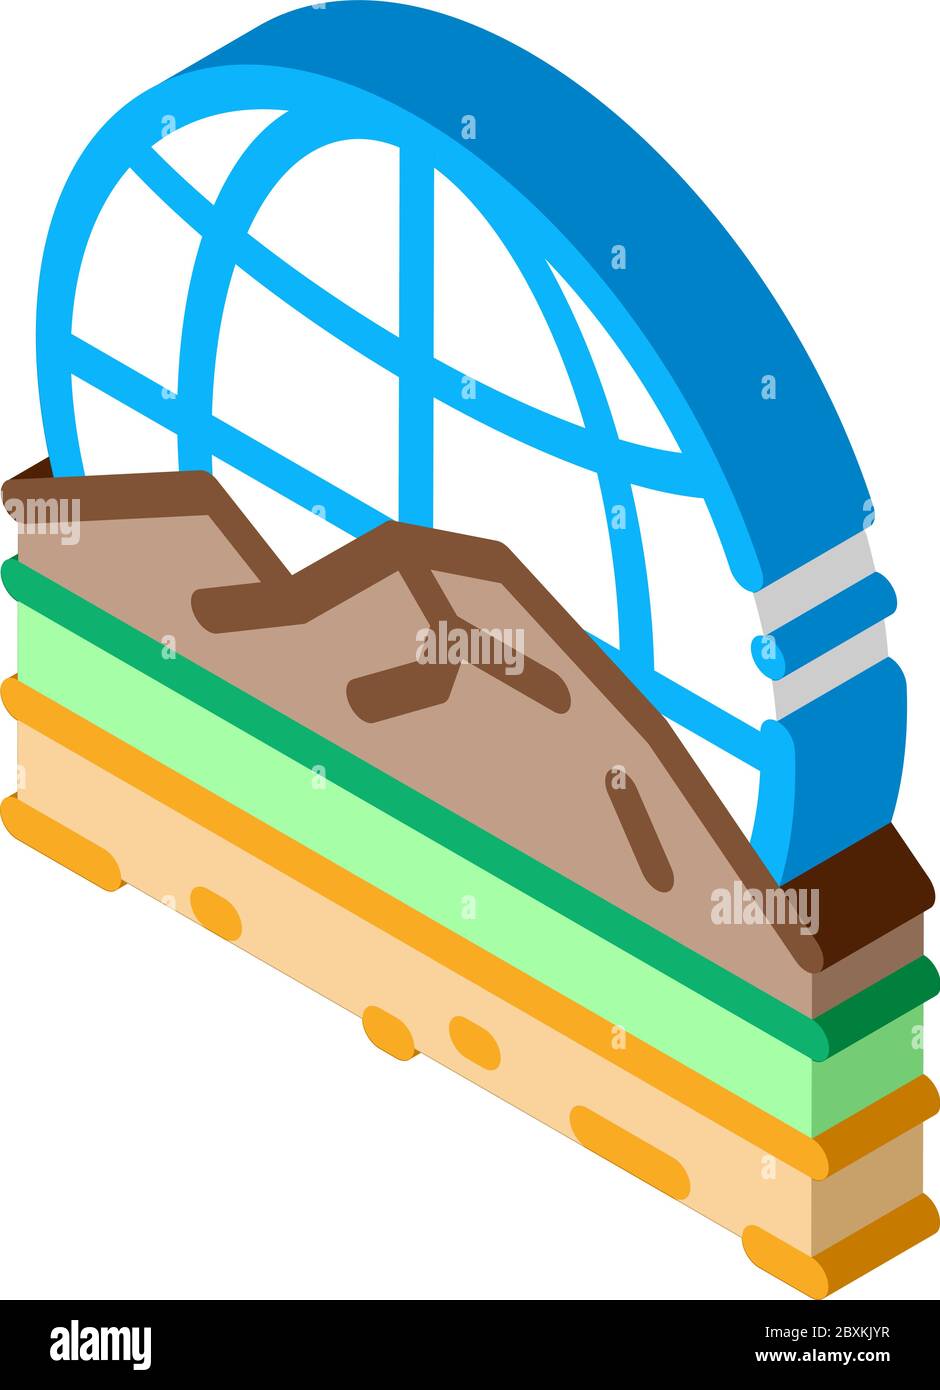 geomorphology science isometric icon vector illustration Stock Vector